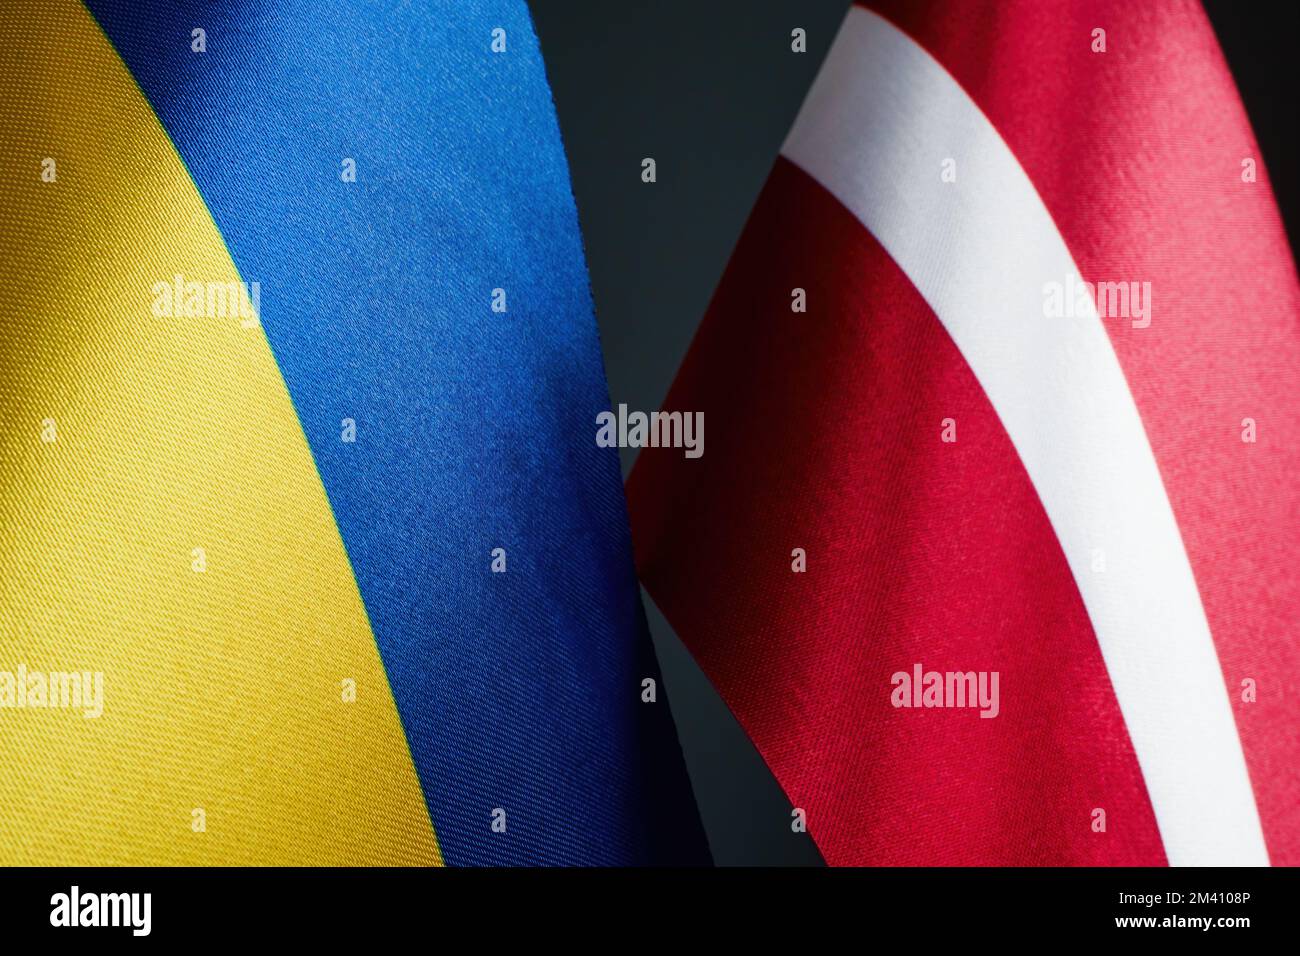 Flags of Ukraine and Latvia as a symbol of cooperation. Stock Photo